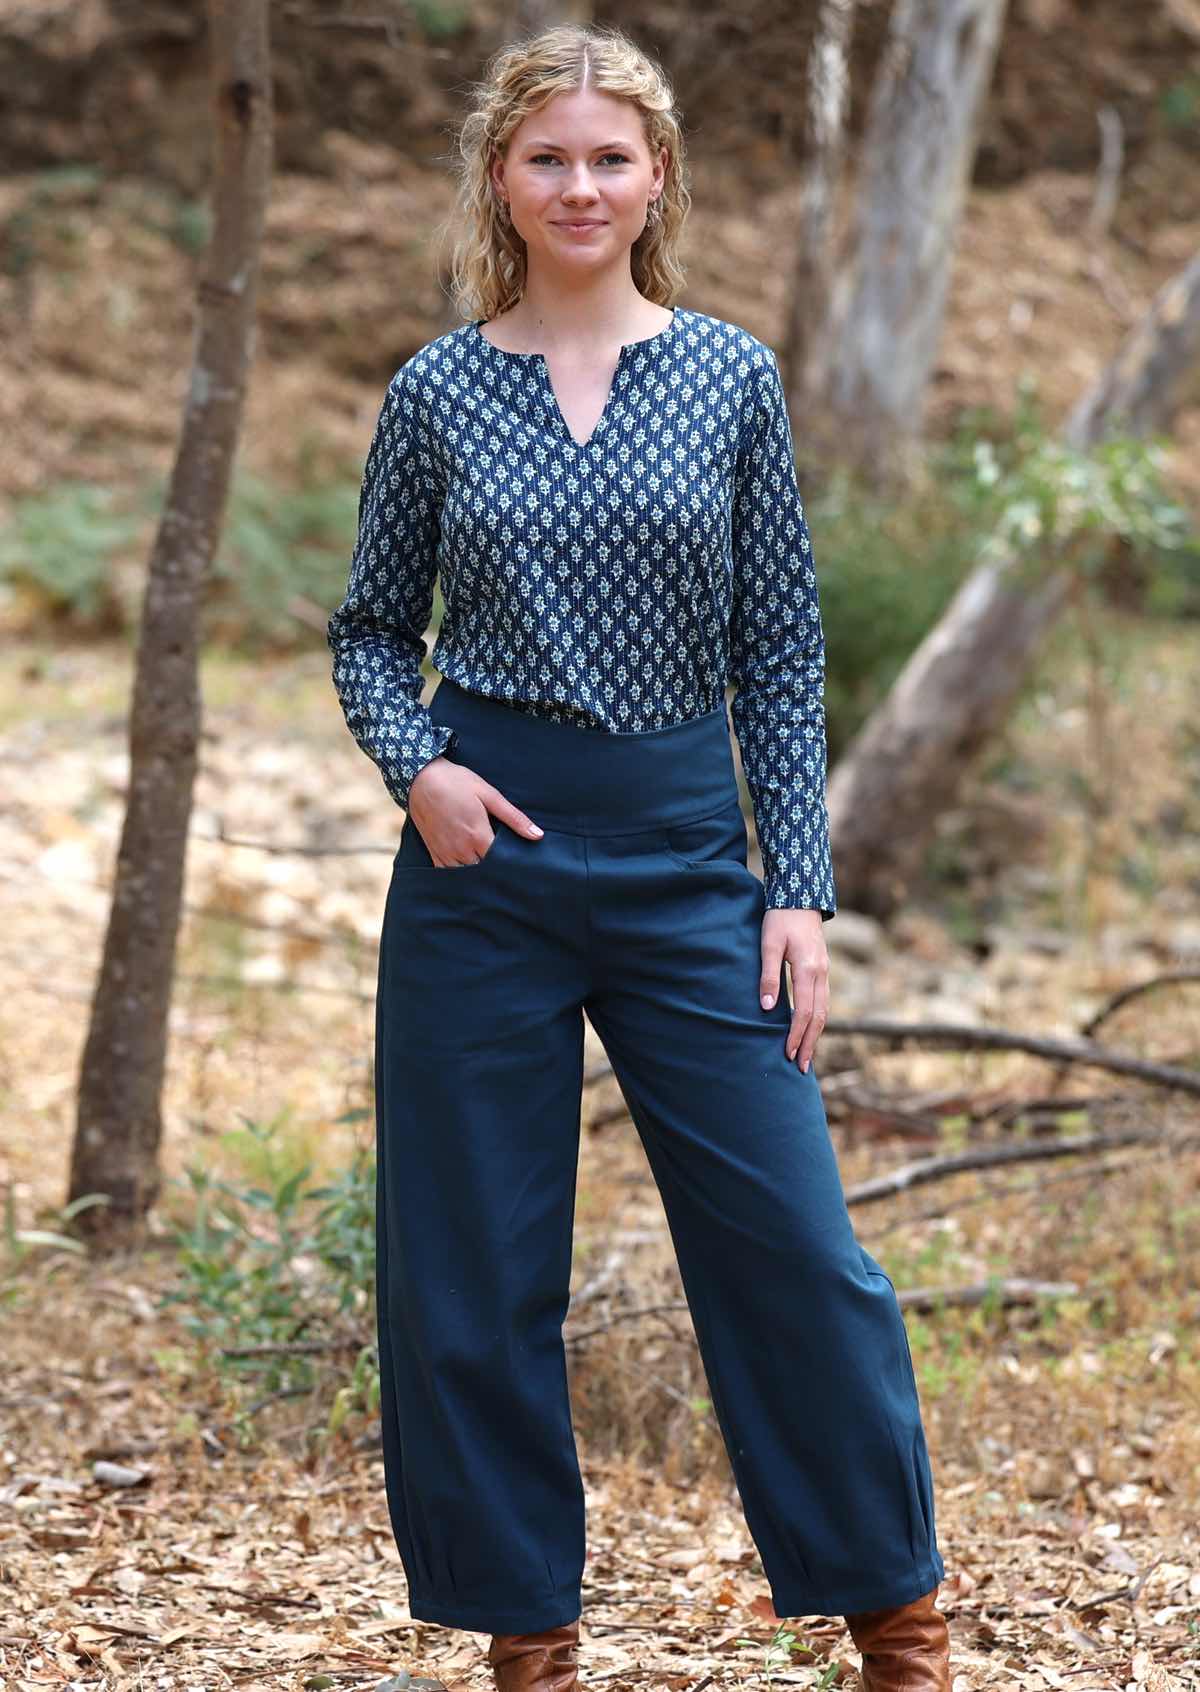 Pair this cotton top with some of our drill cotton pants for an autumn outfit